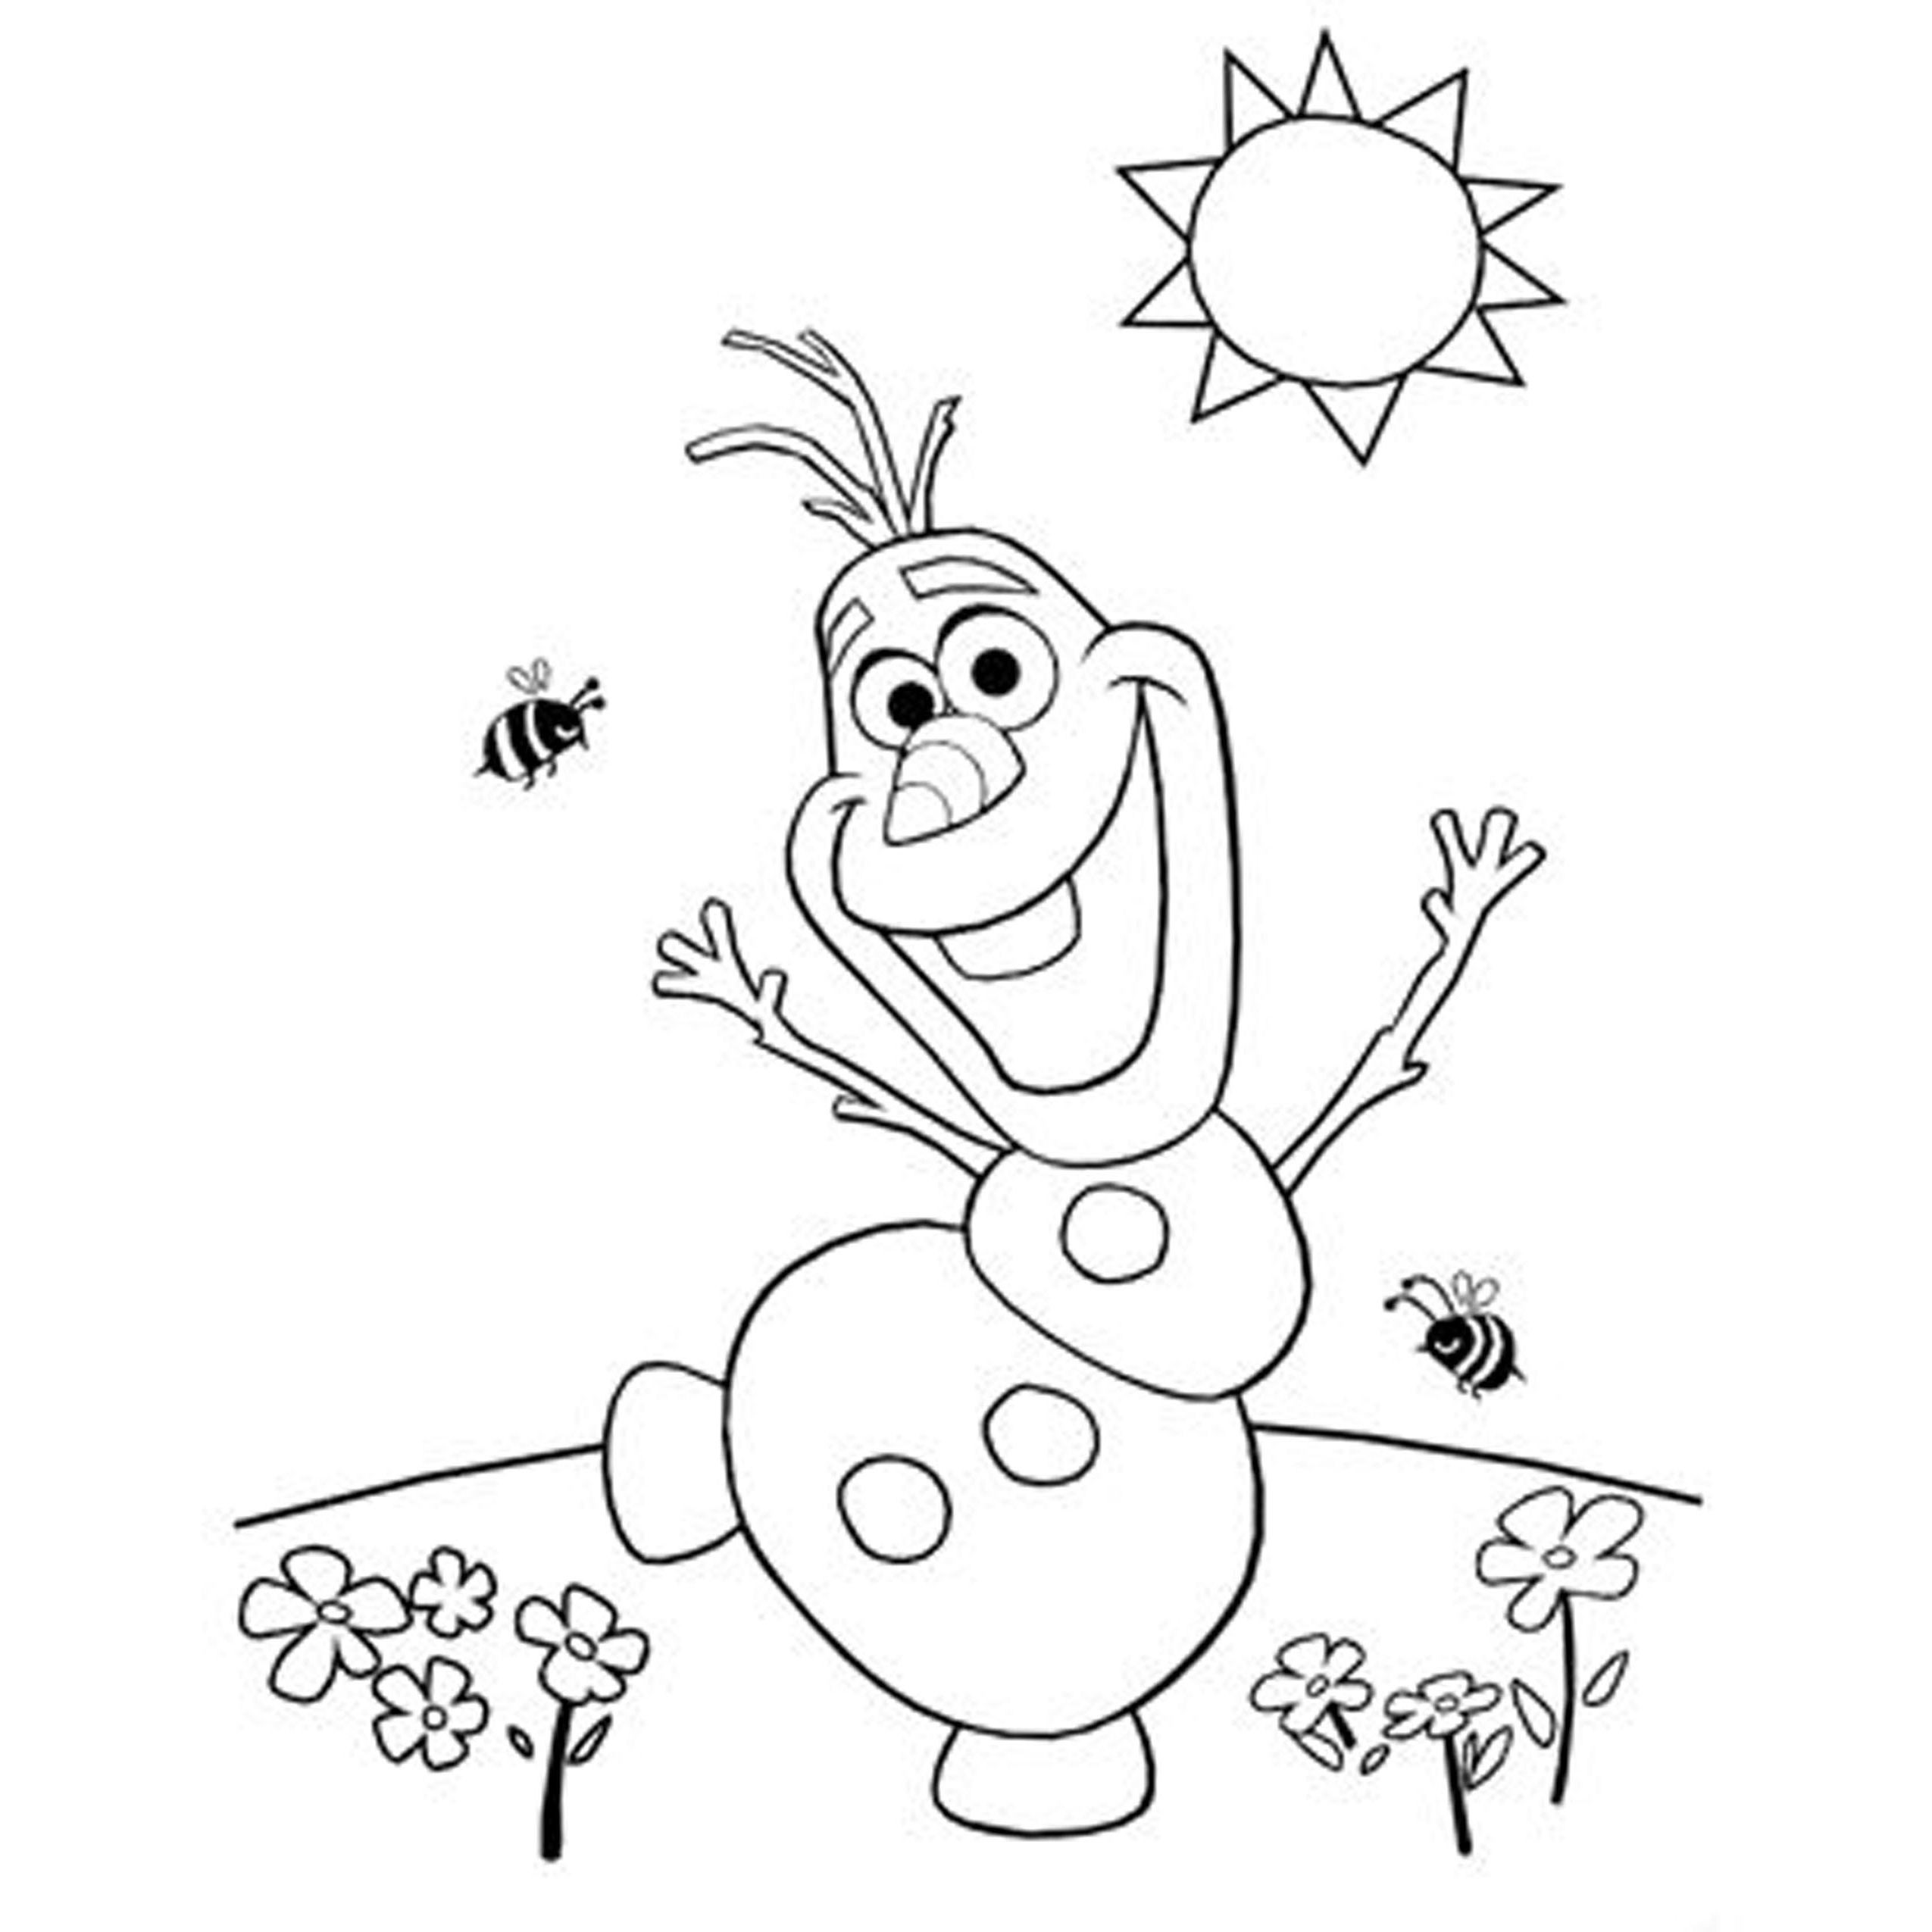 Frozen Coloring Pages For Toddlers
 Frozen Drawing For Kids at GetDrawings